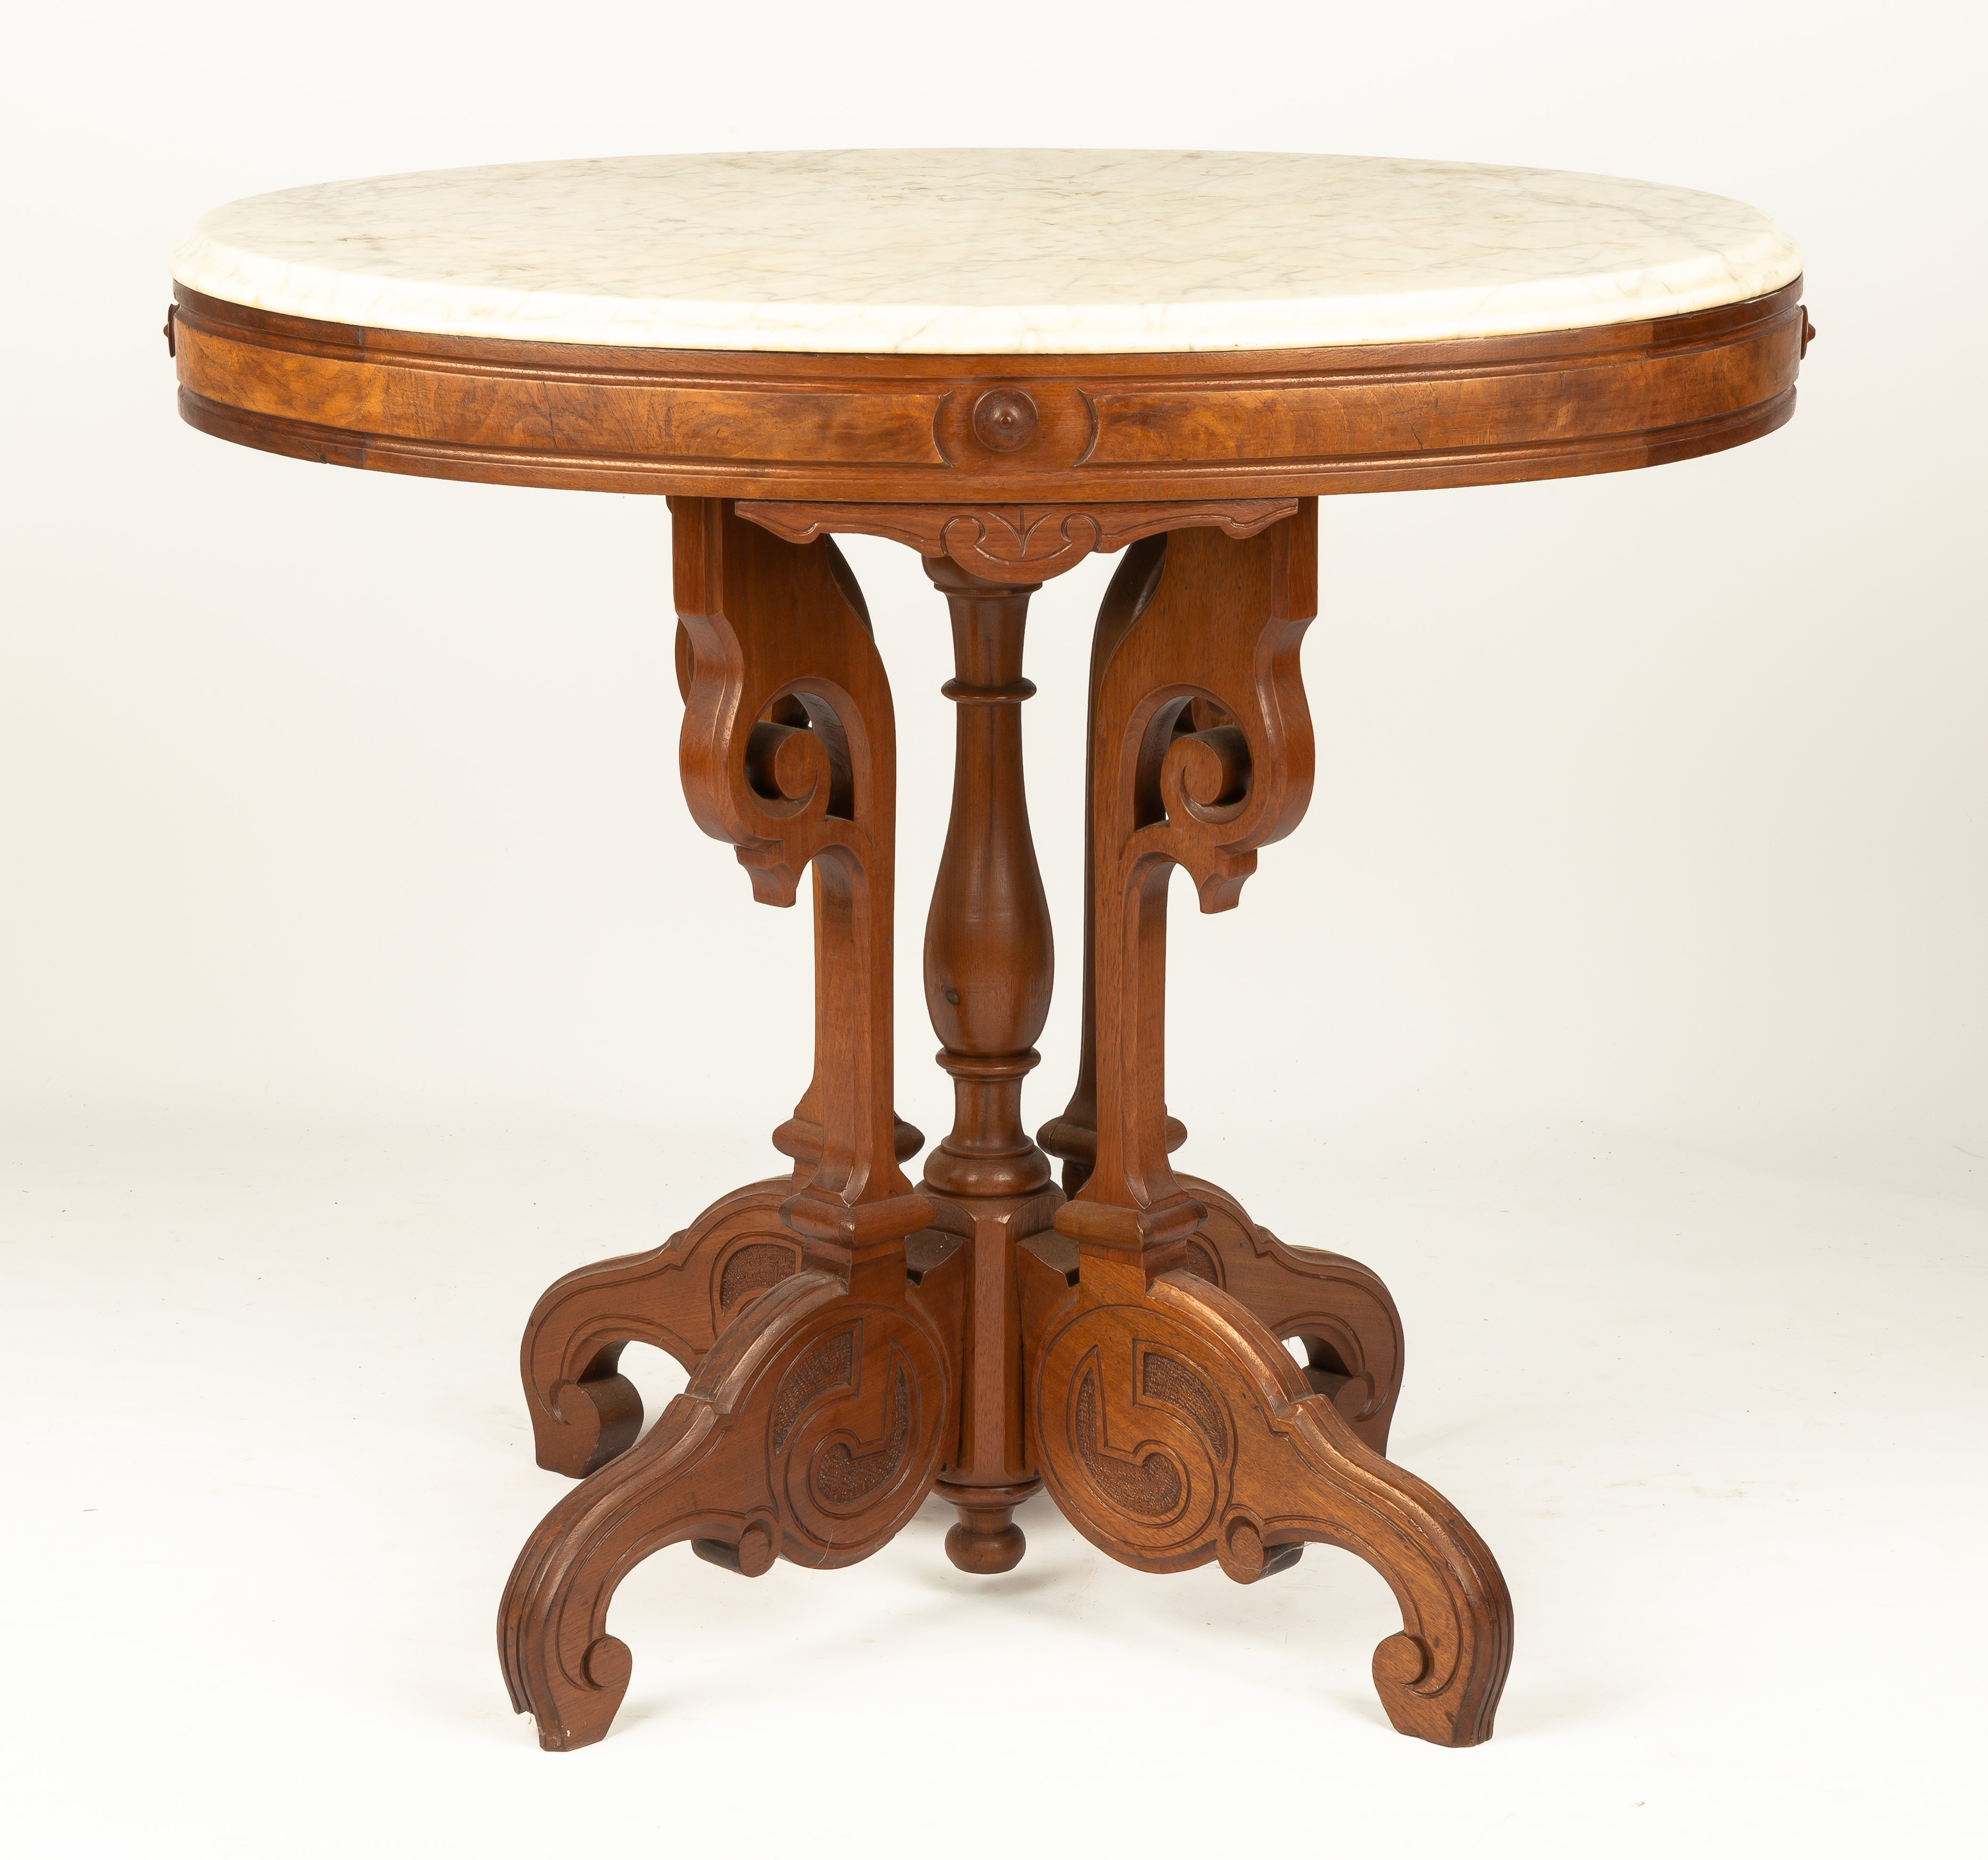 OVAL MARBLE-TOP WALNUT TABLE Oval Marble-Top